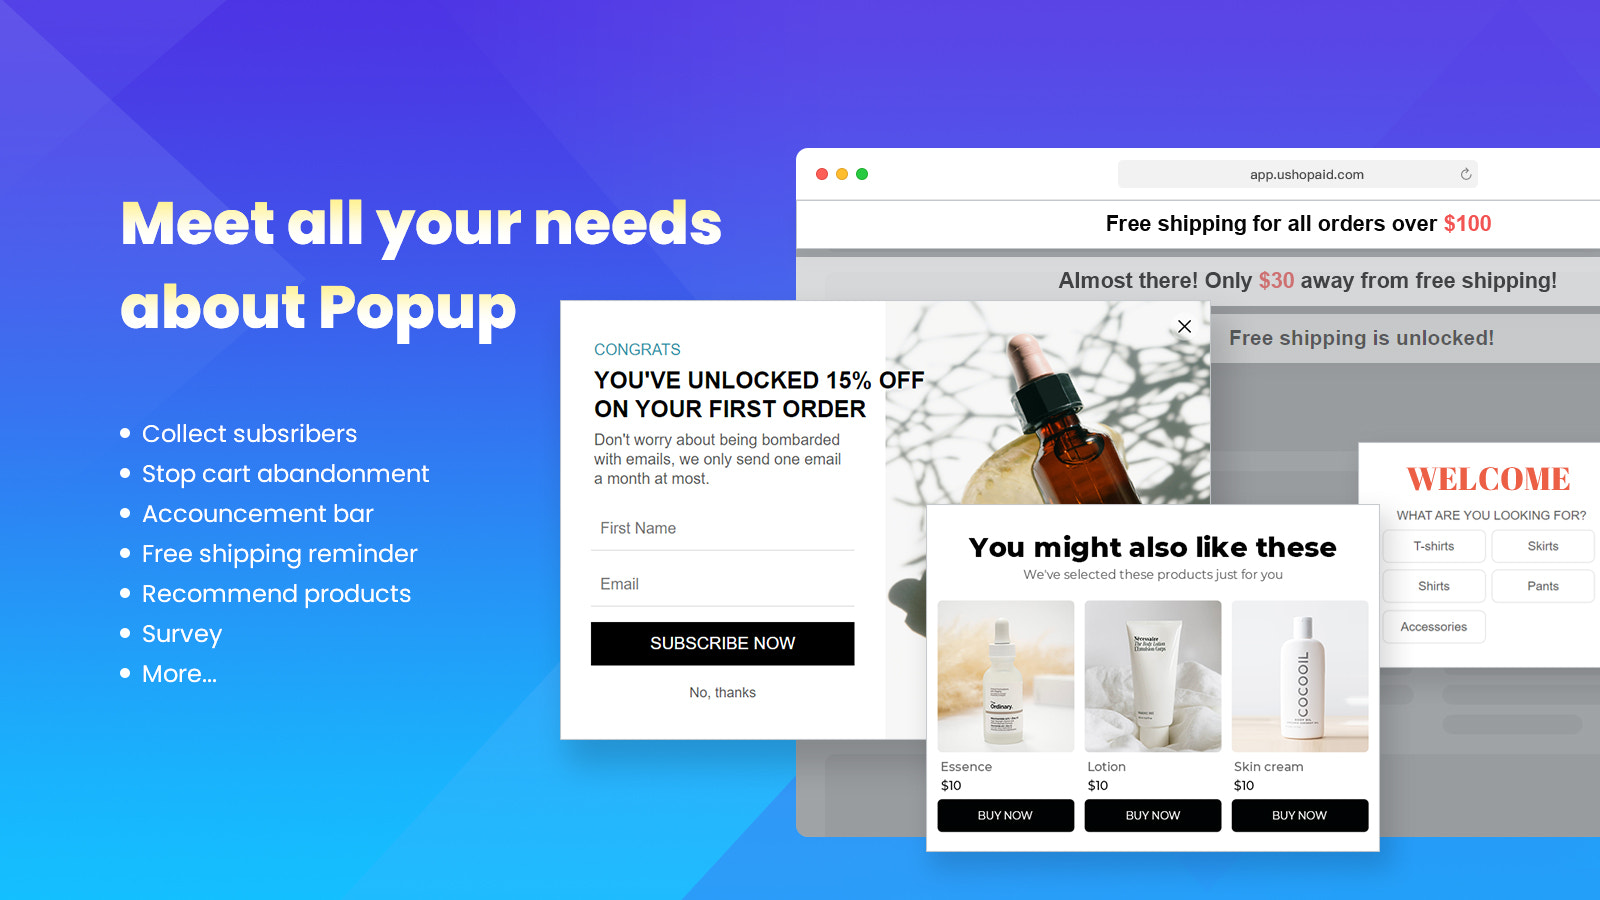 Meet all your needs about Popup